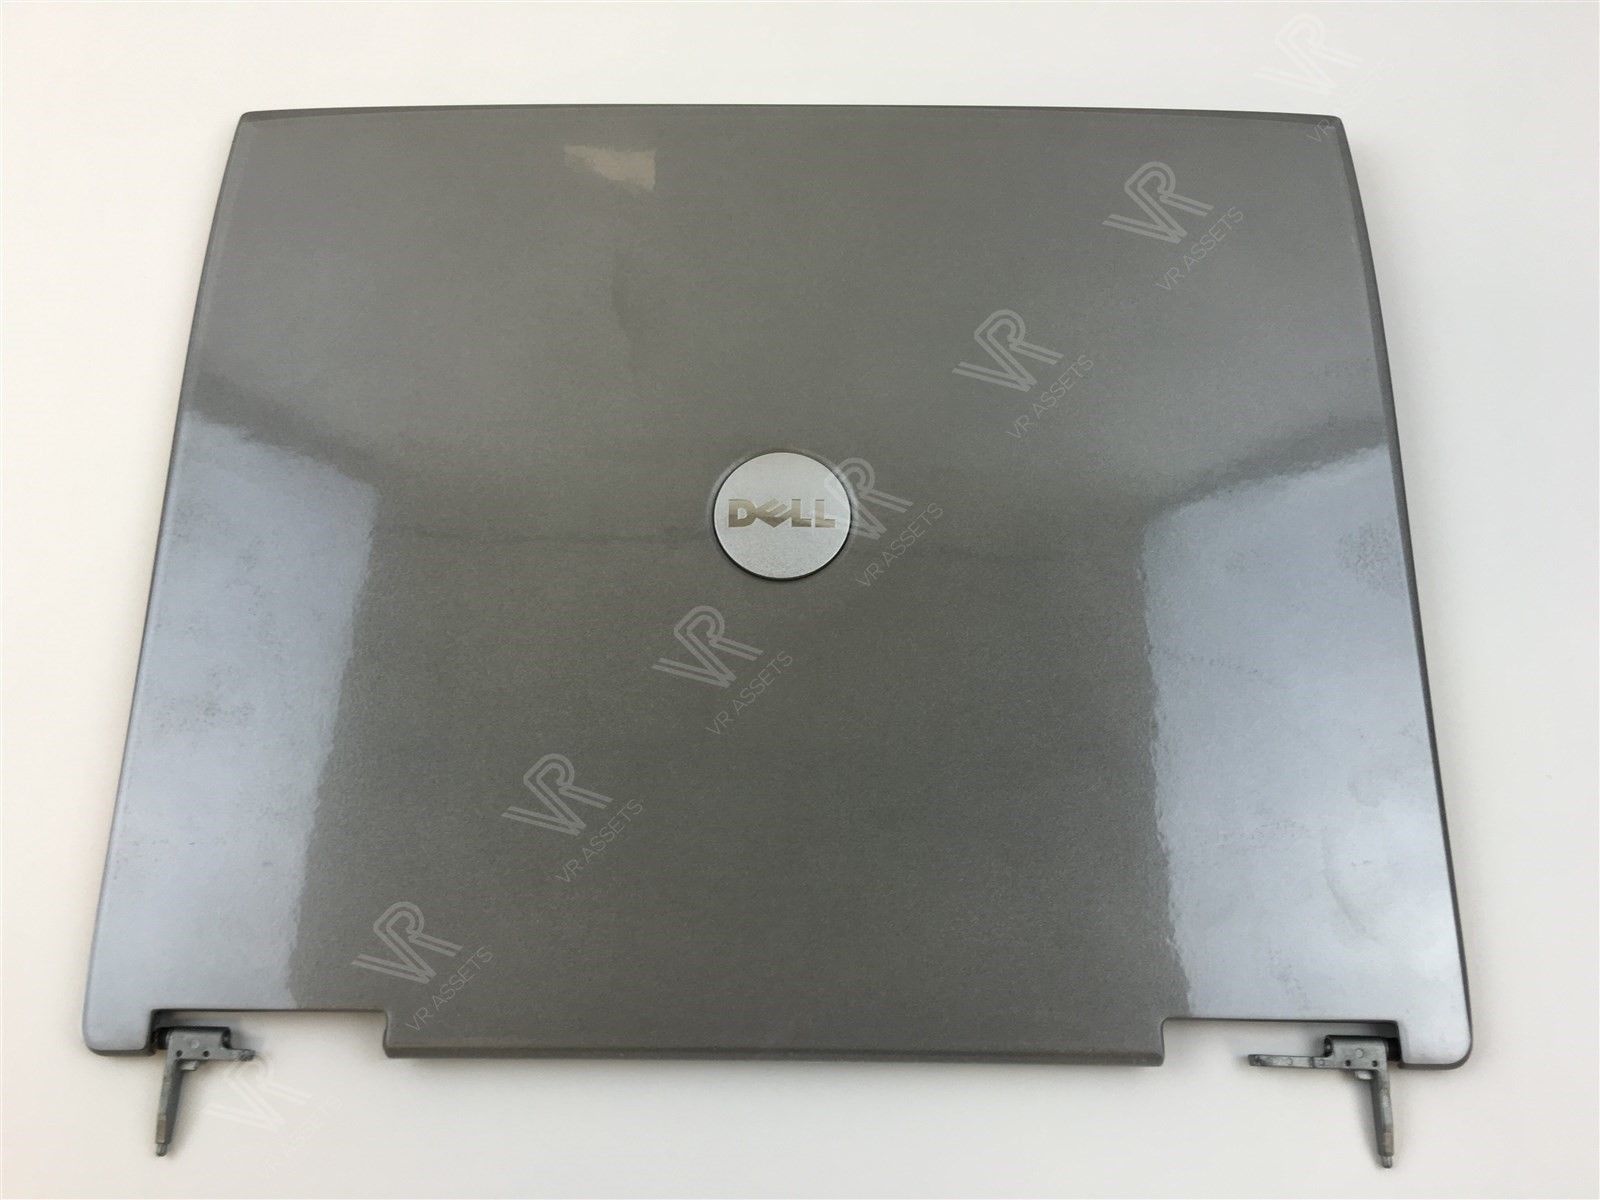 New 14.1" Genuine Dell Latitude D600 600M LCD Back Cover Lid Hinges 8M669 08M669